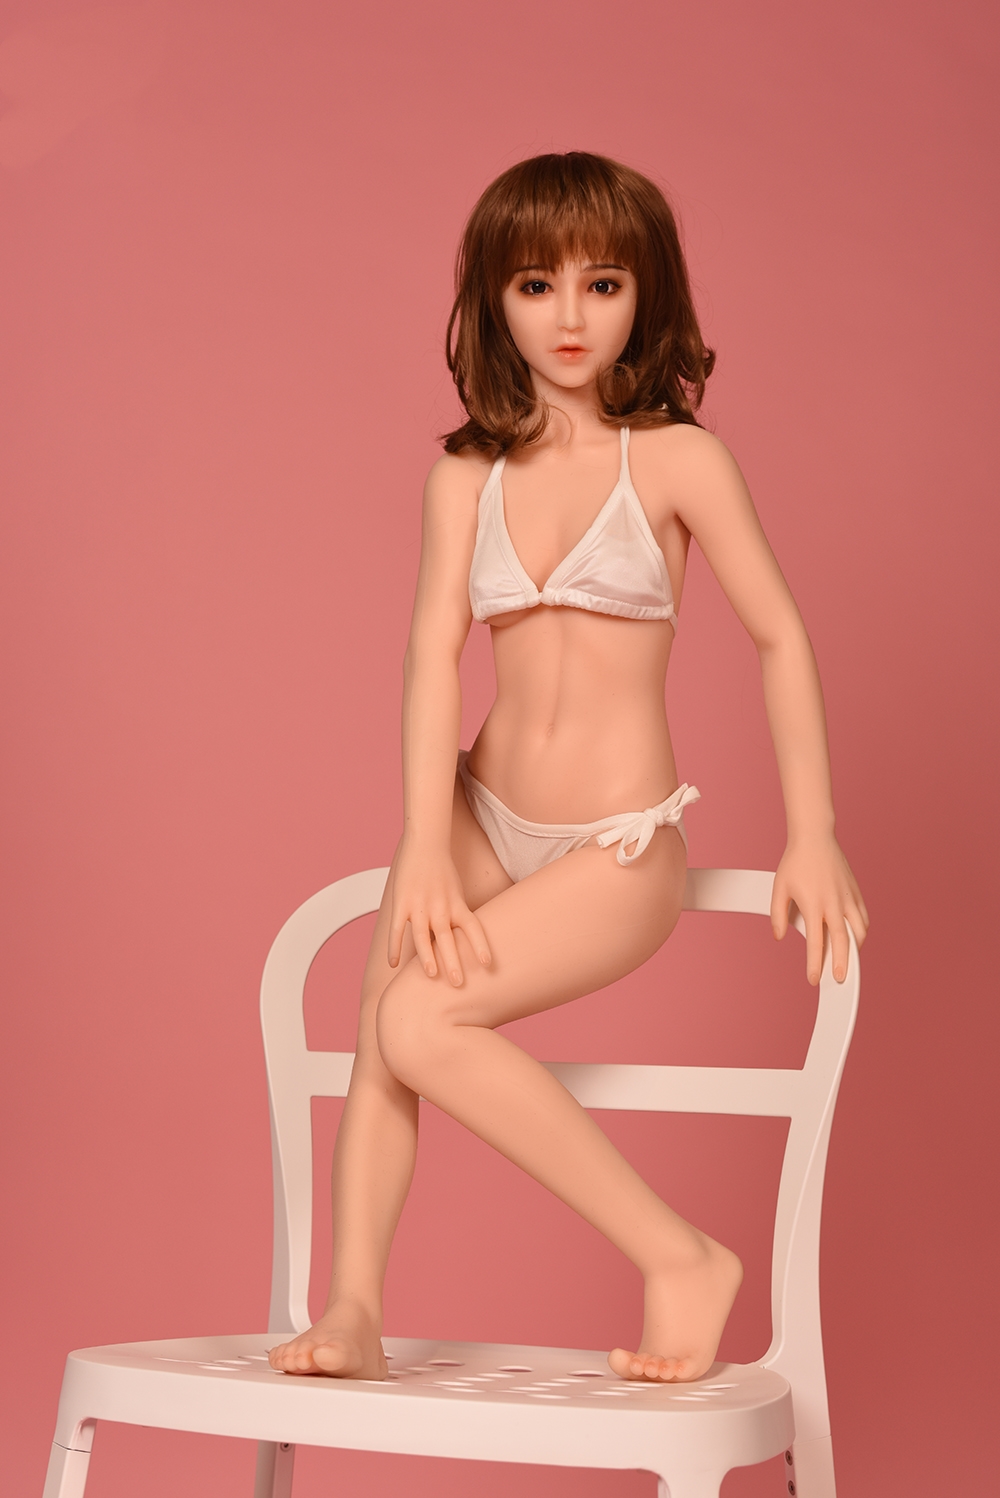 Mini Sex Doll Mini Sex Doll Suppliers And Manufacturers 1